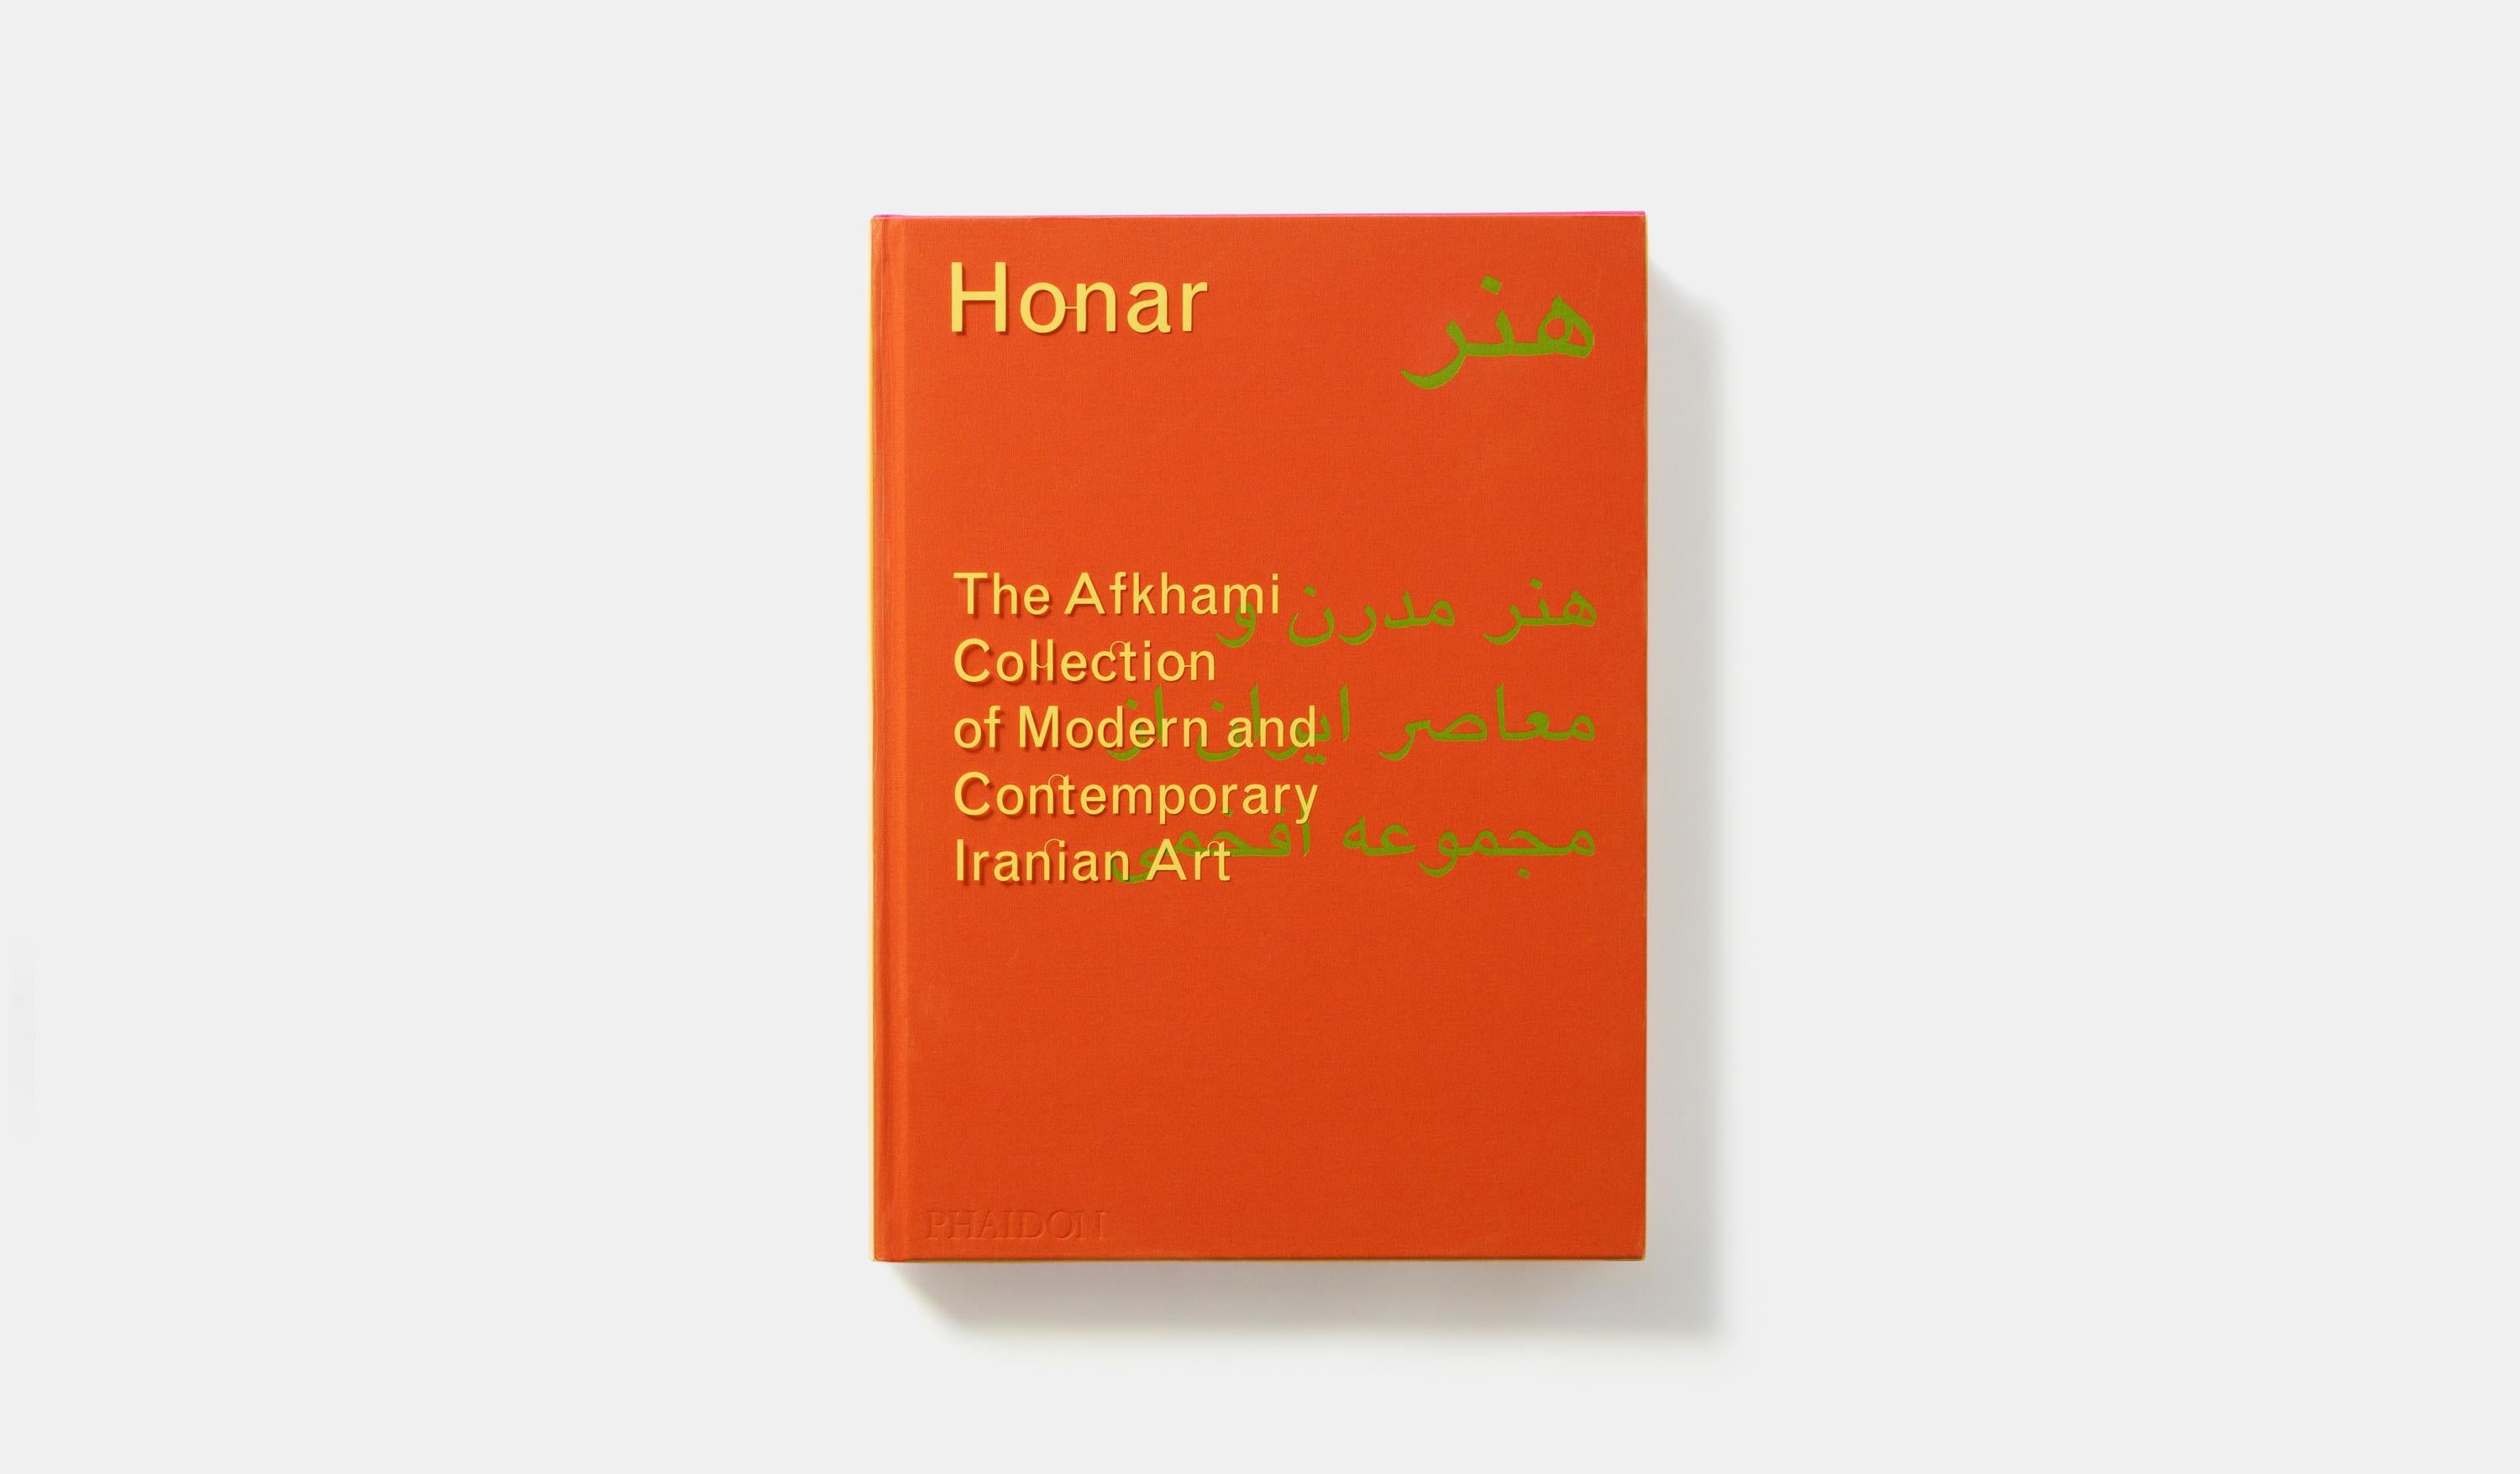 The first and only book on one of the finest private collections of contemporary Iranian art

This sumptuous volume features almost 250 contemporary artworks and a selection of medieval and early modern Islamic art - the heralded collection of